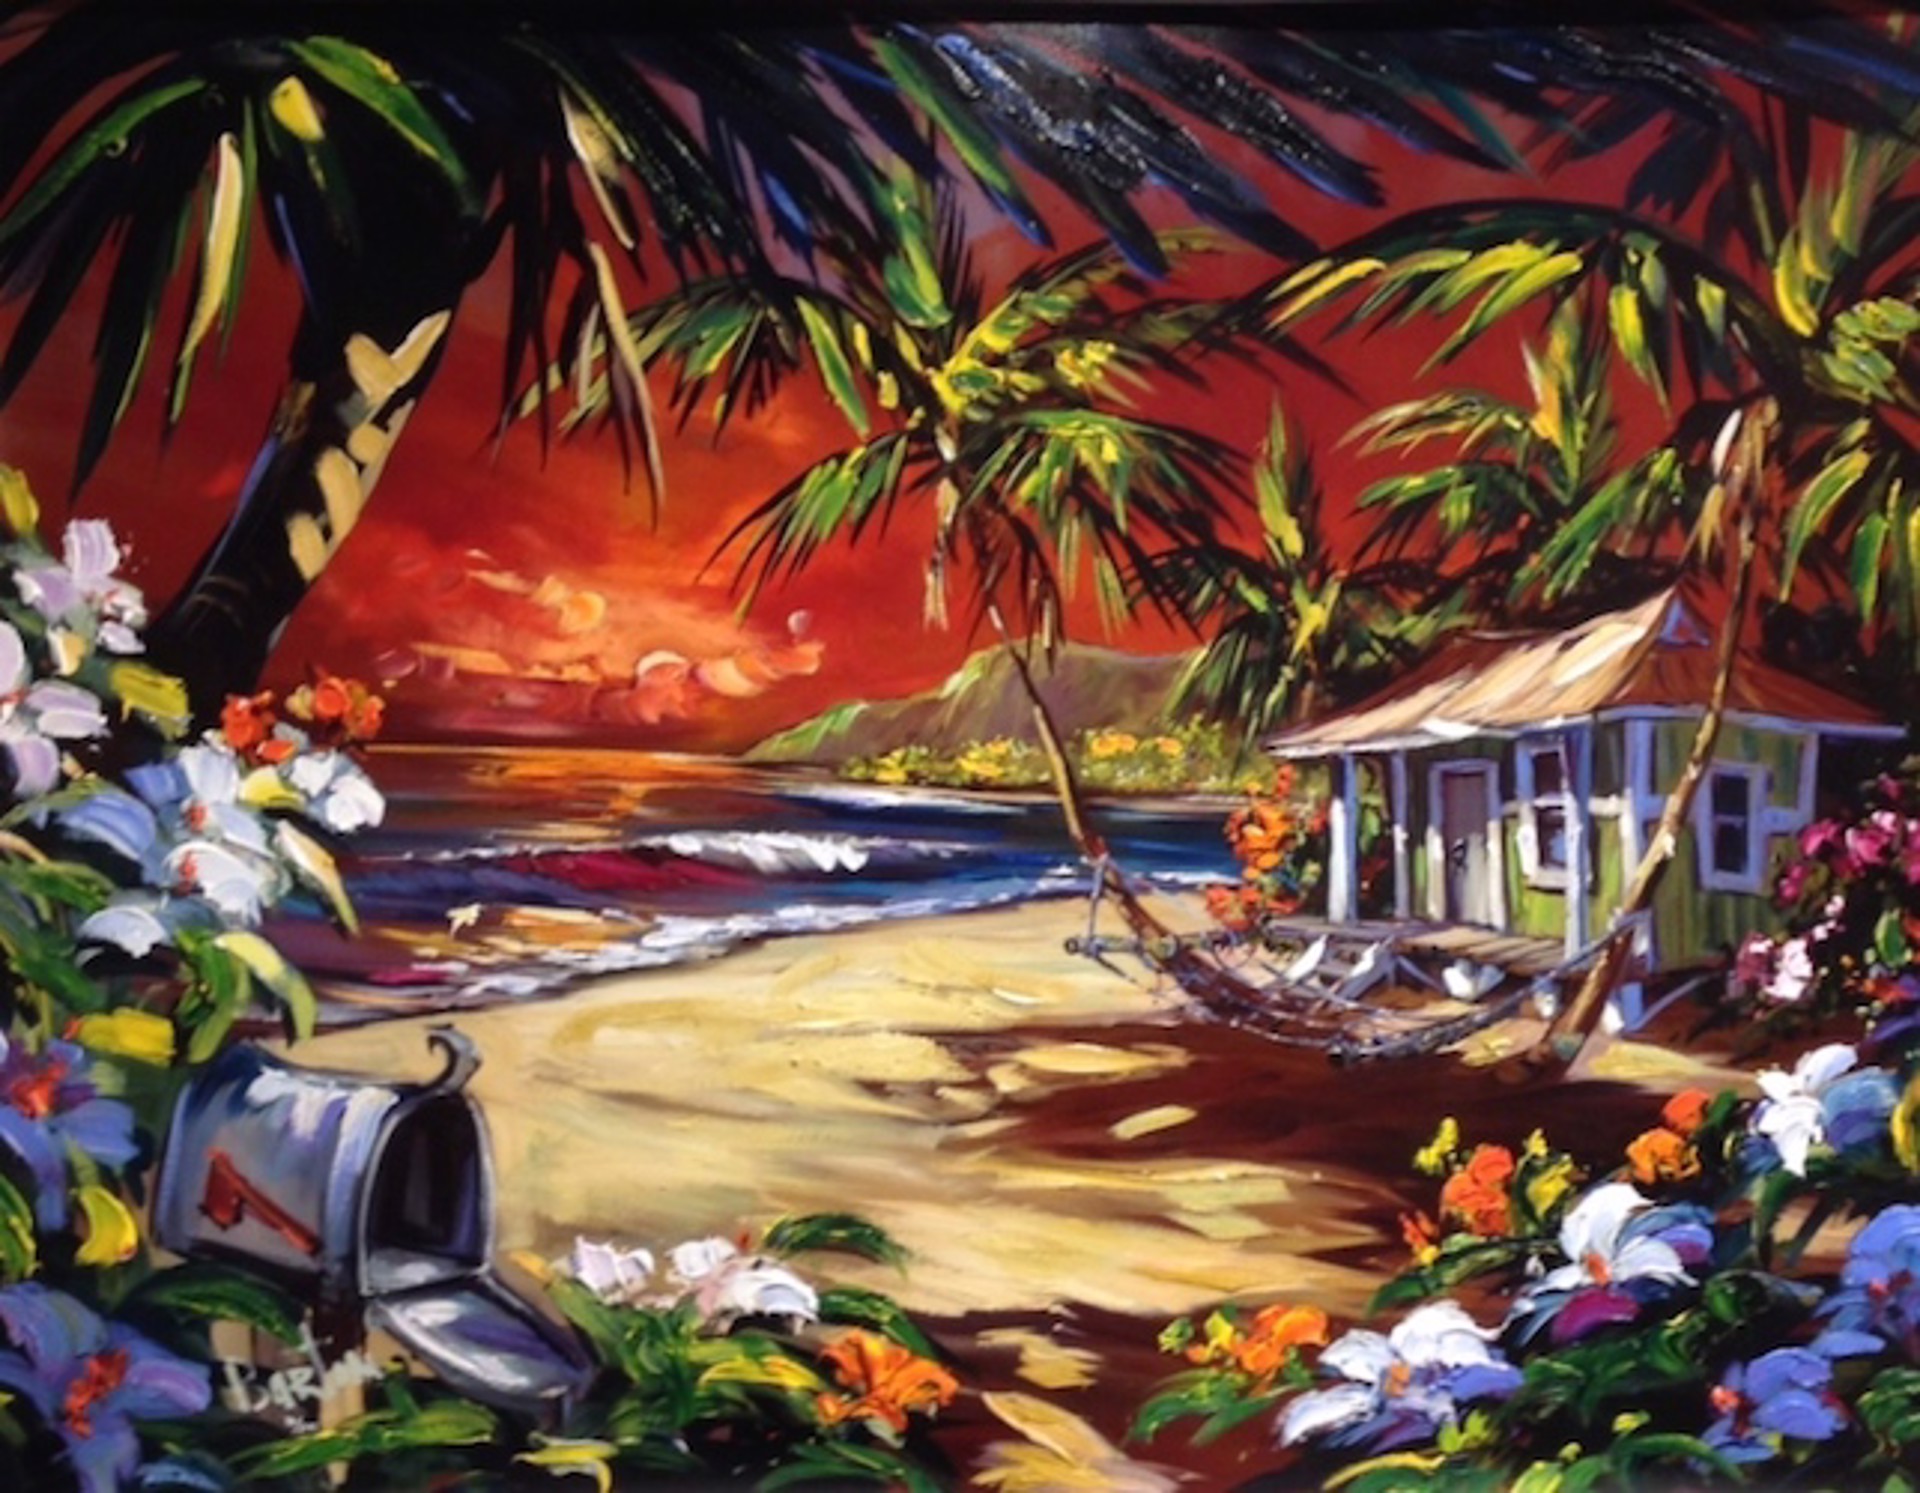 Evening Paradise (Available in 18" by 24" and 30" by 40") by Steve Barton